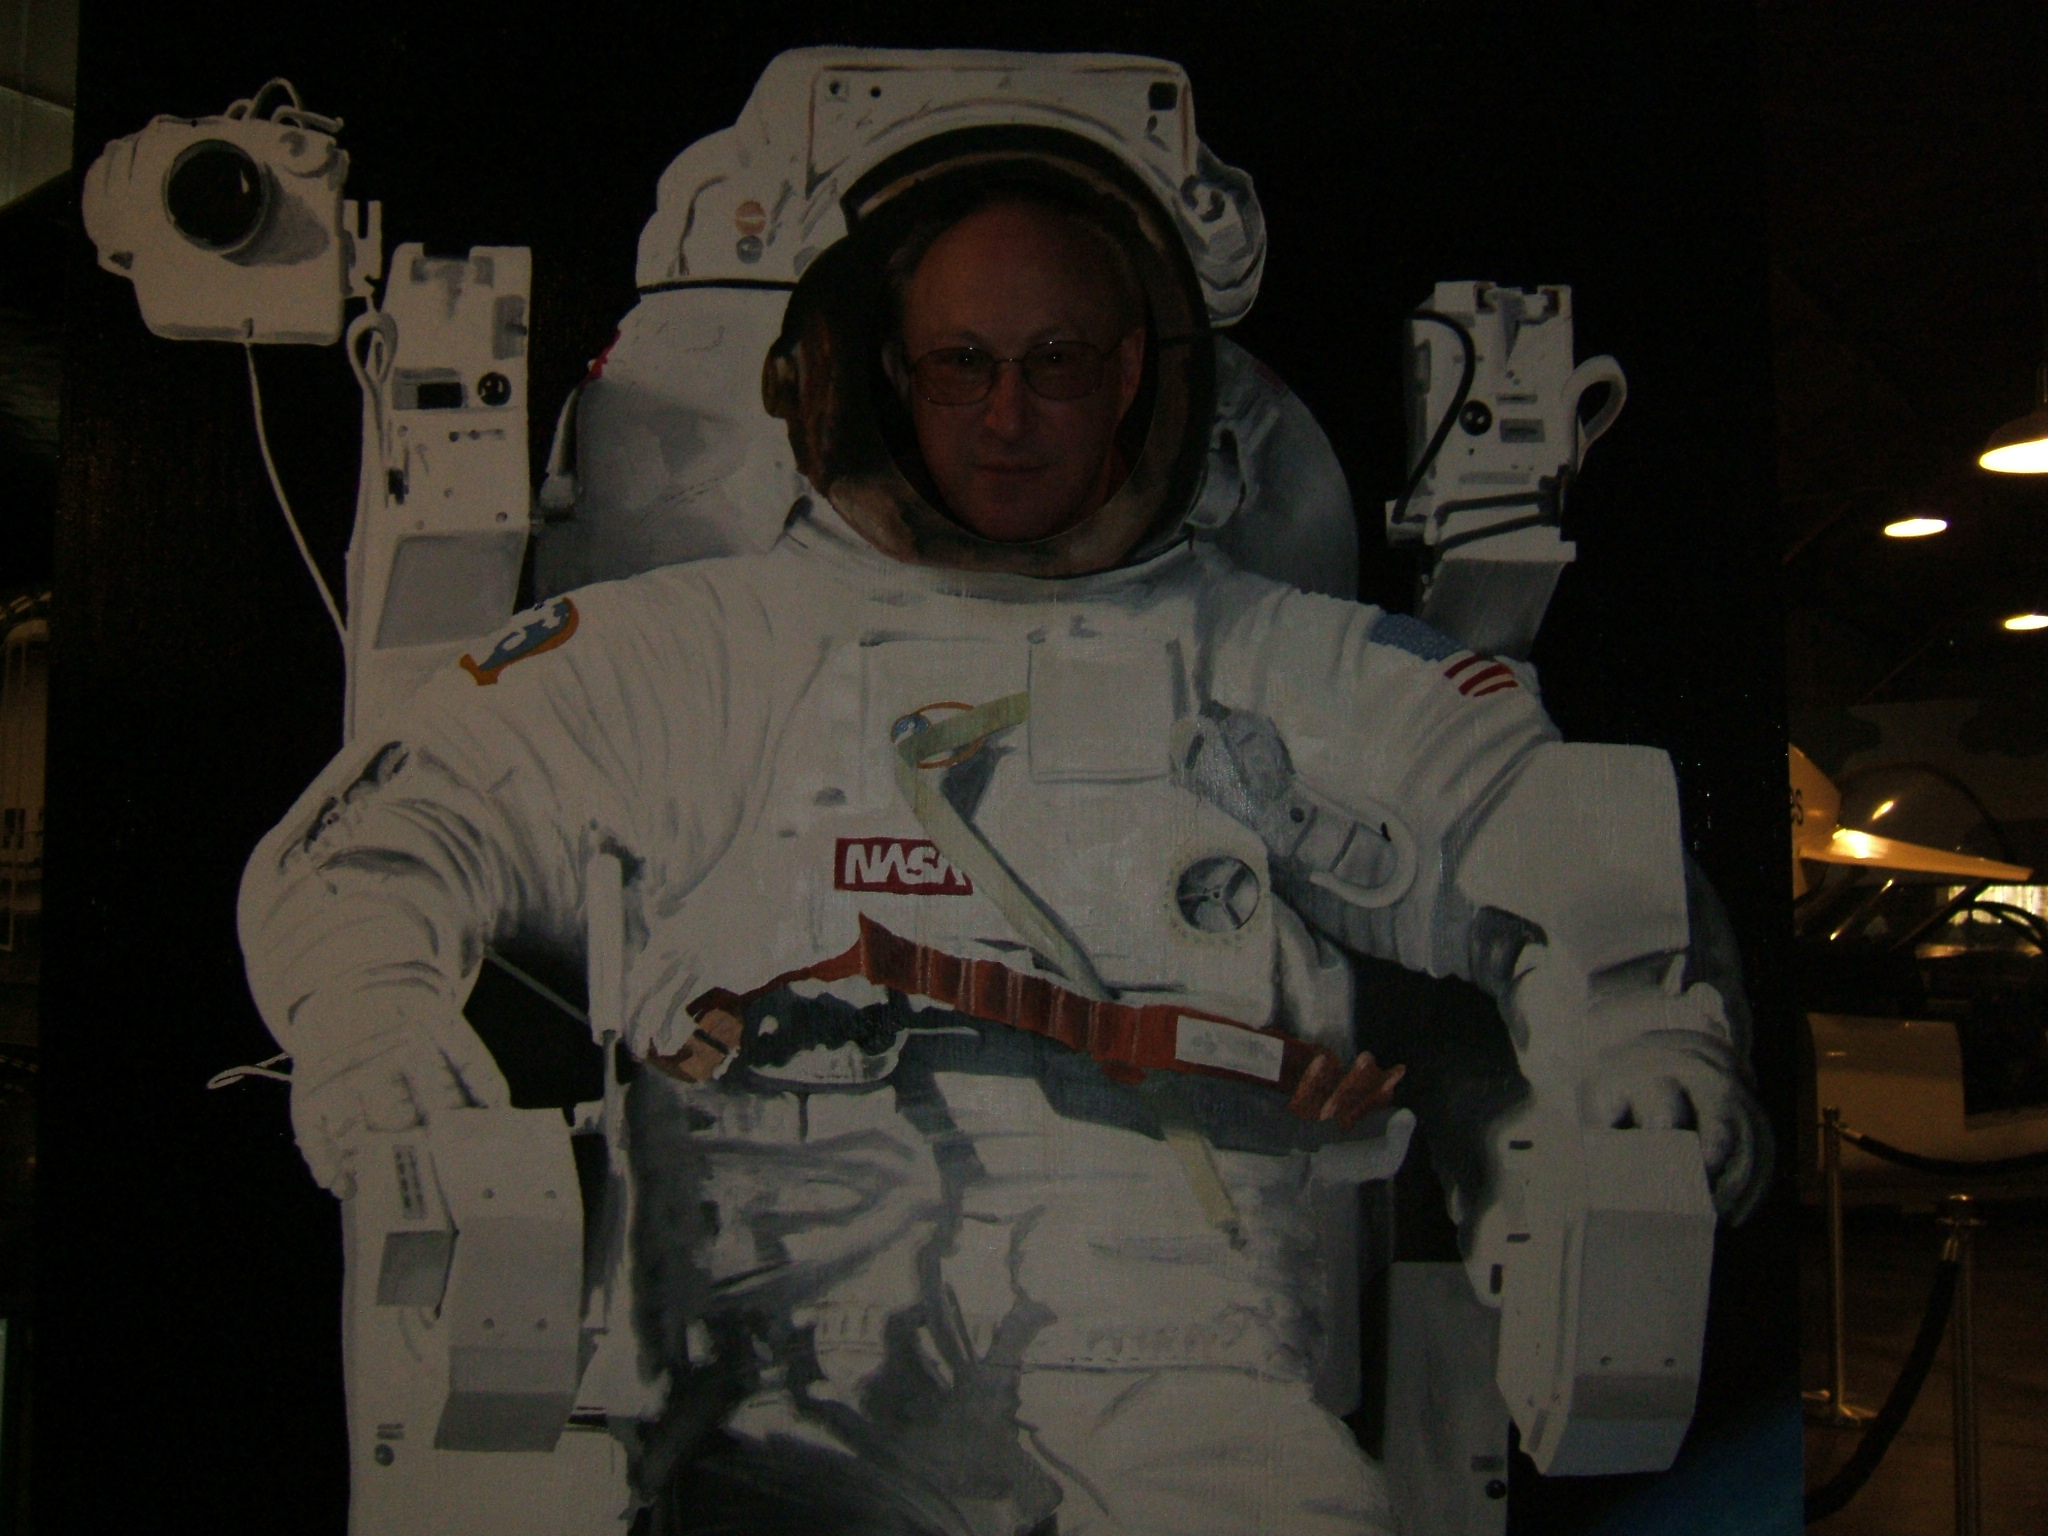 Don in the space suit cutout